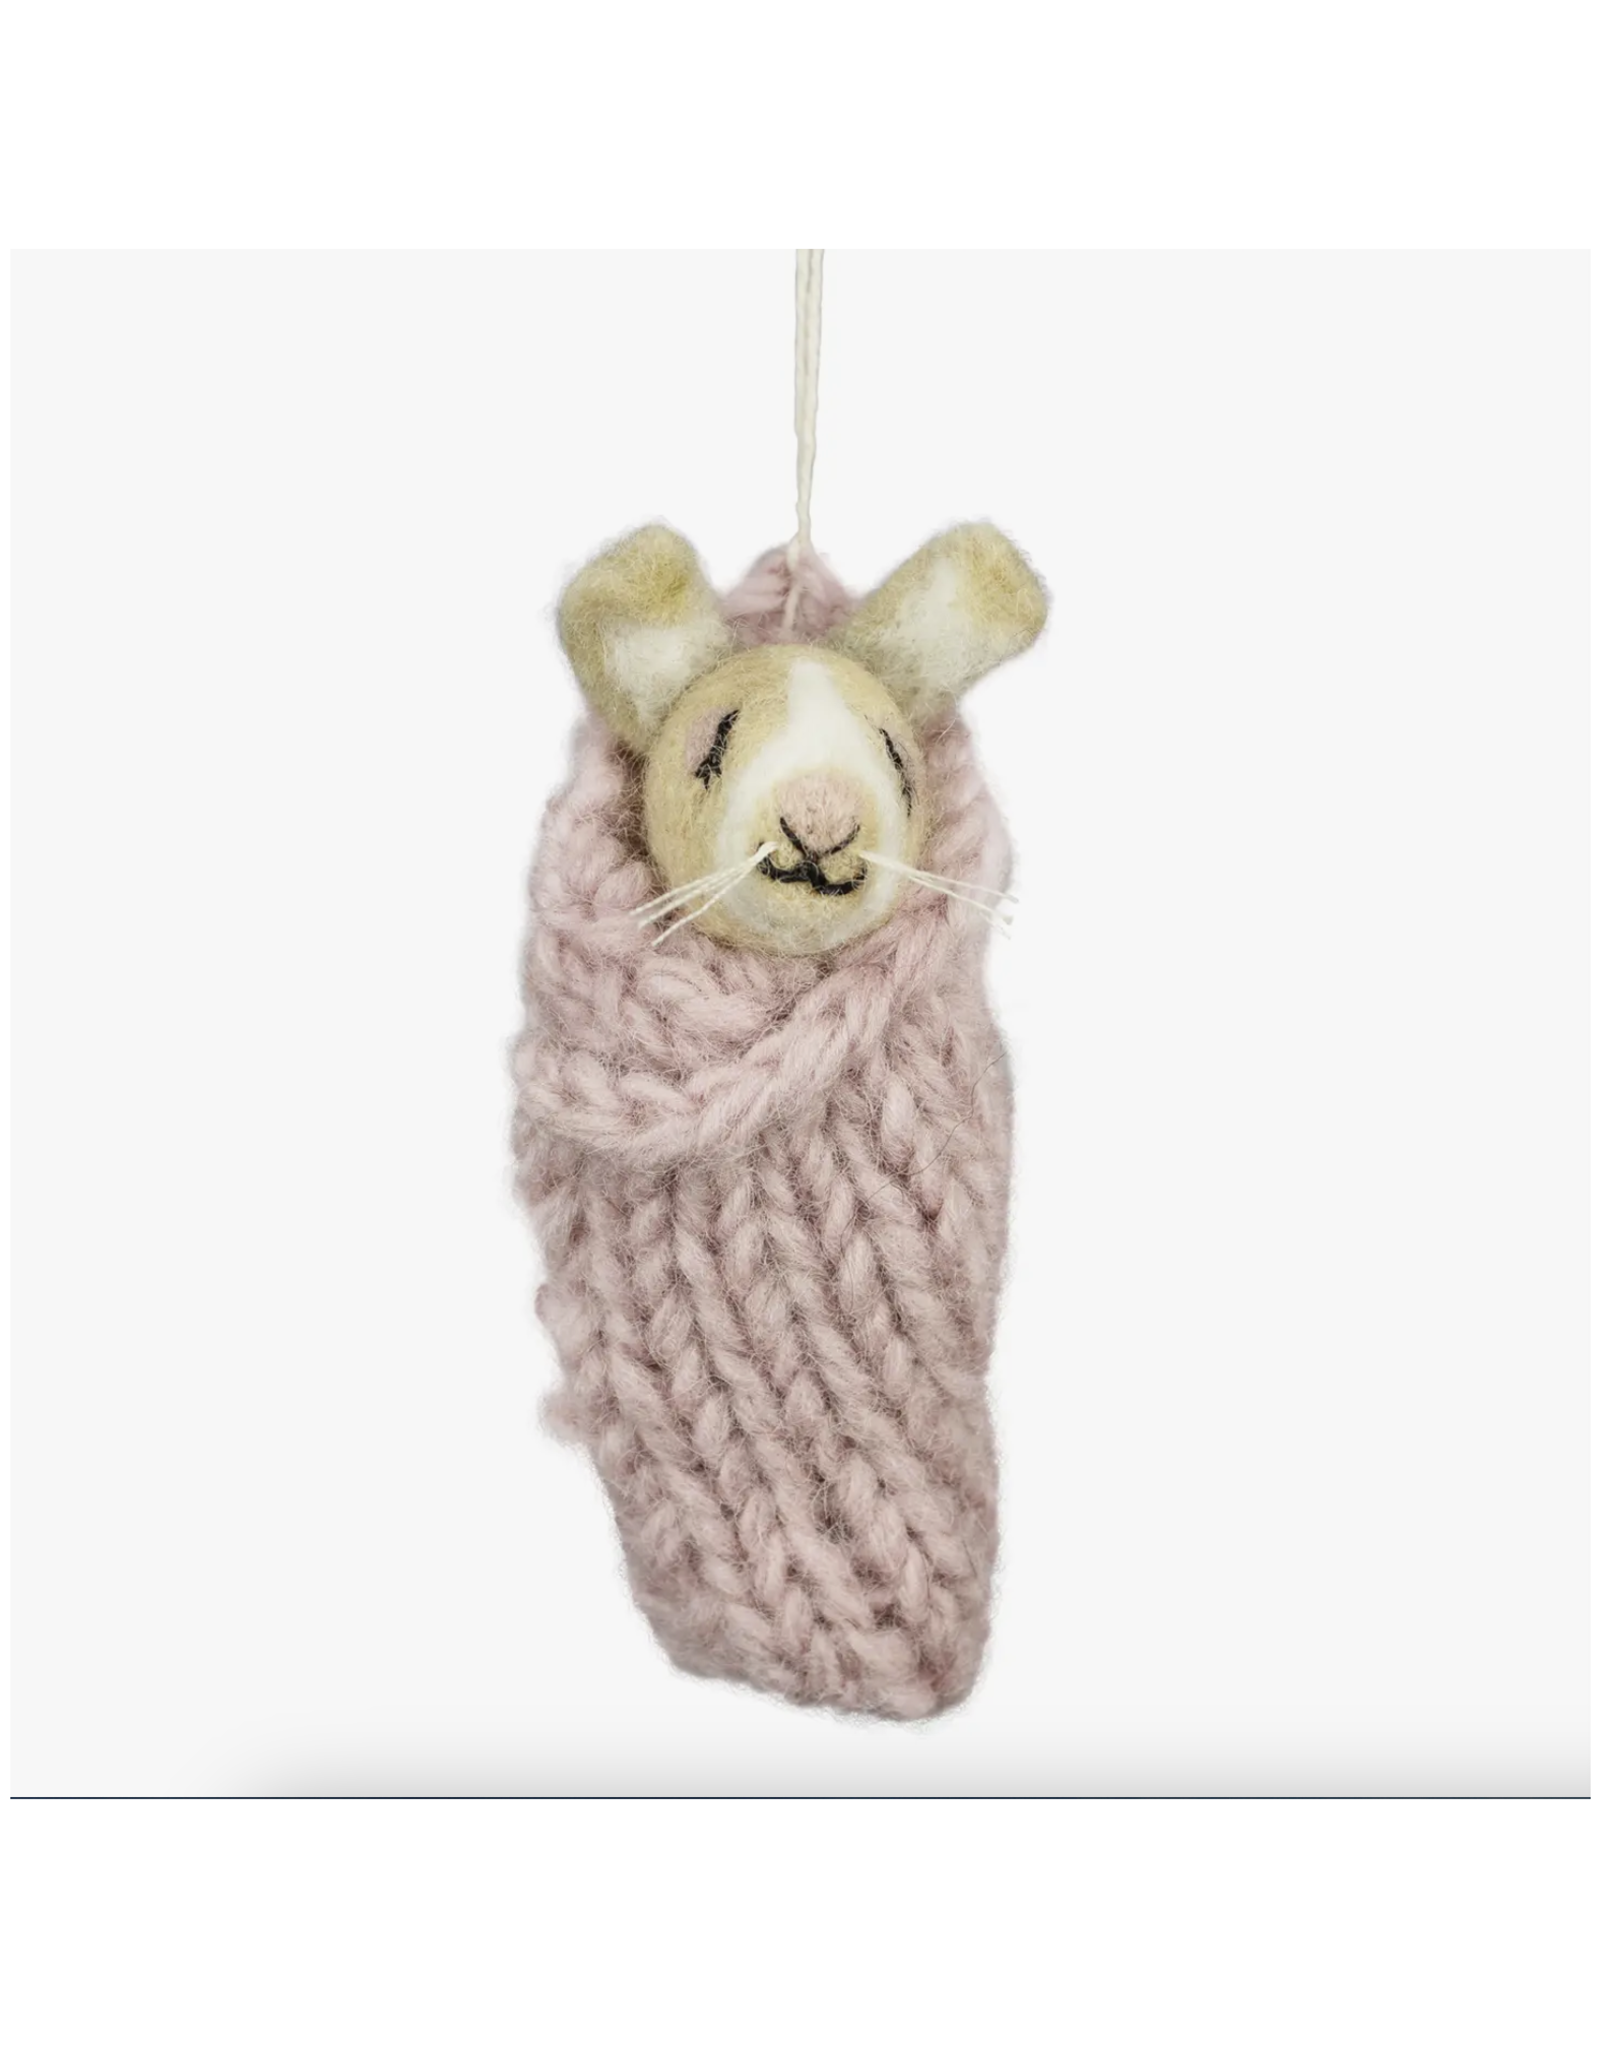 Cozy Critter Pink Bunny Ornament